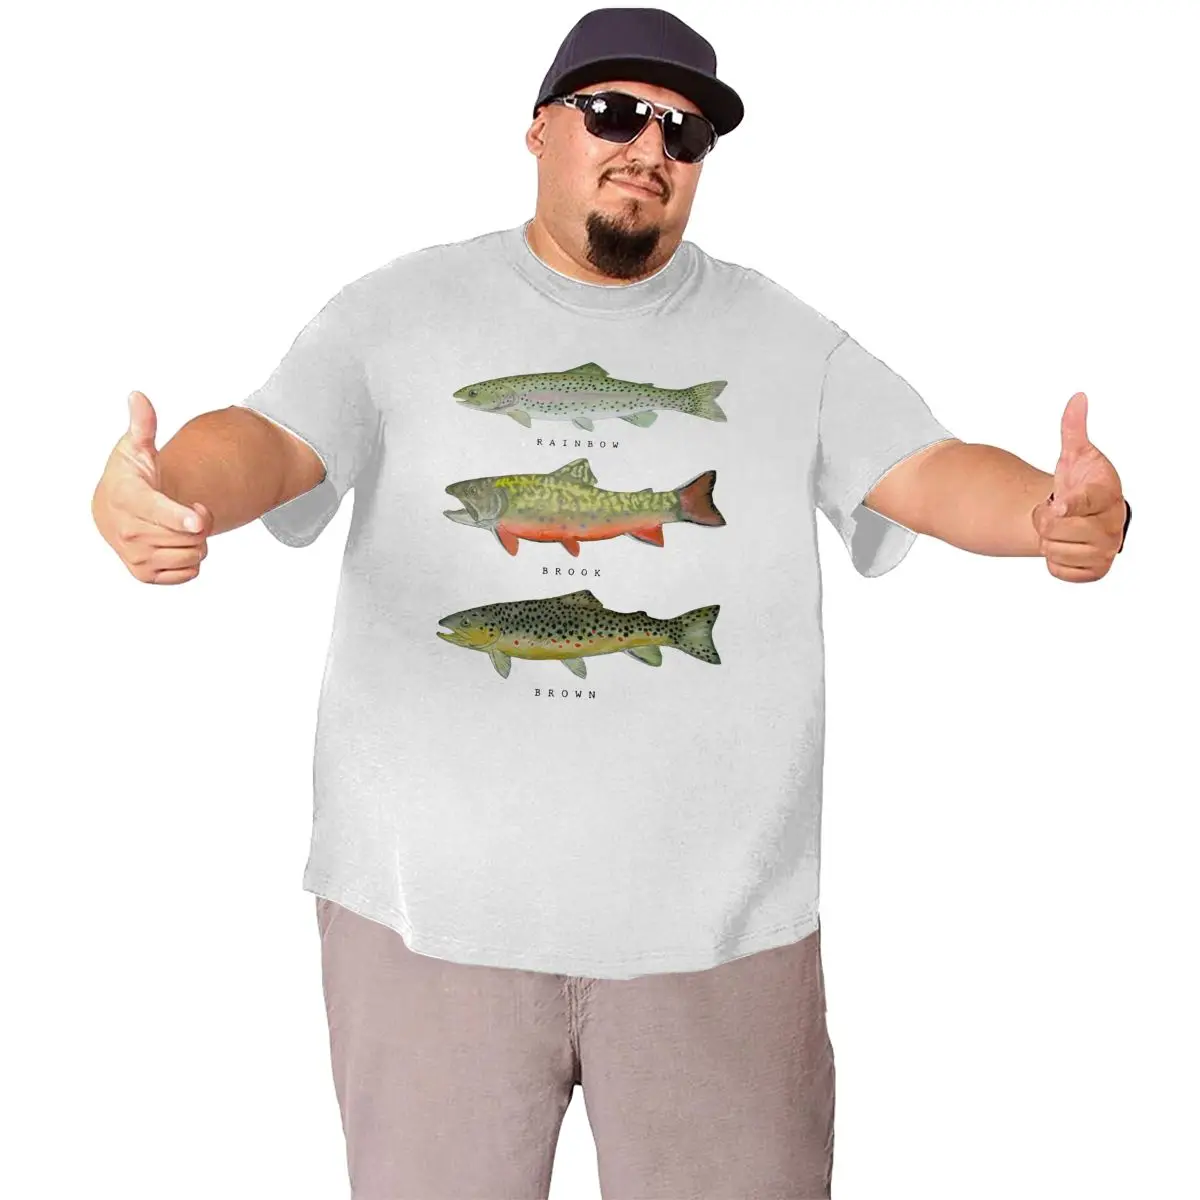 Brown Rainbow Trout Triad T Shirts Men Funny T-Shirts Fishing Fly